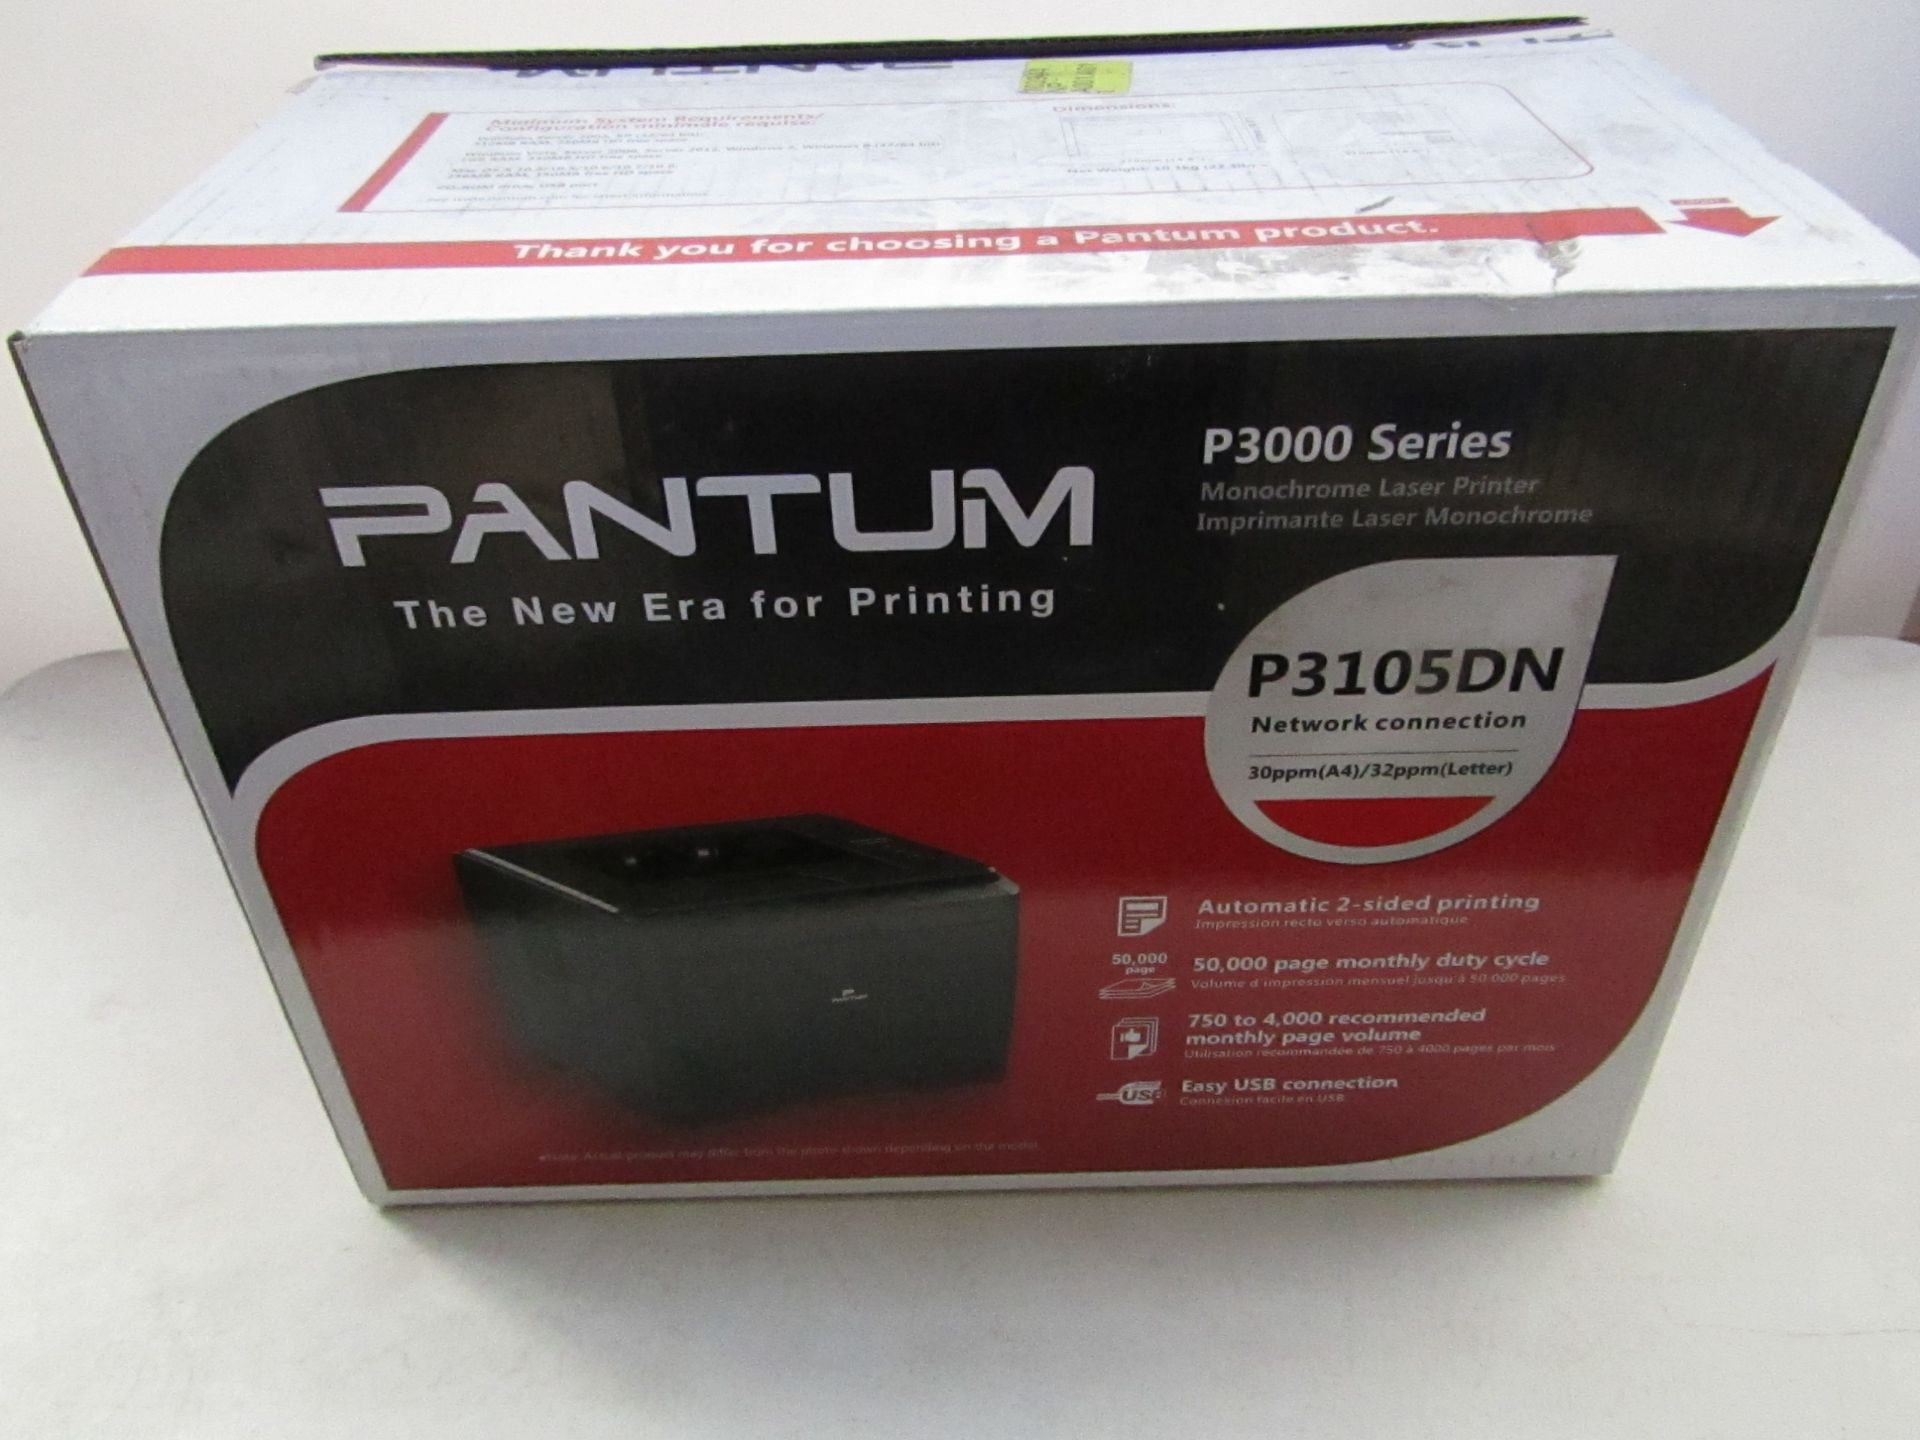 Pantum p3000 series monochrome laser printer, new and boxed.